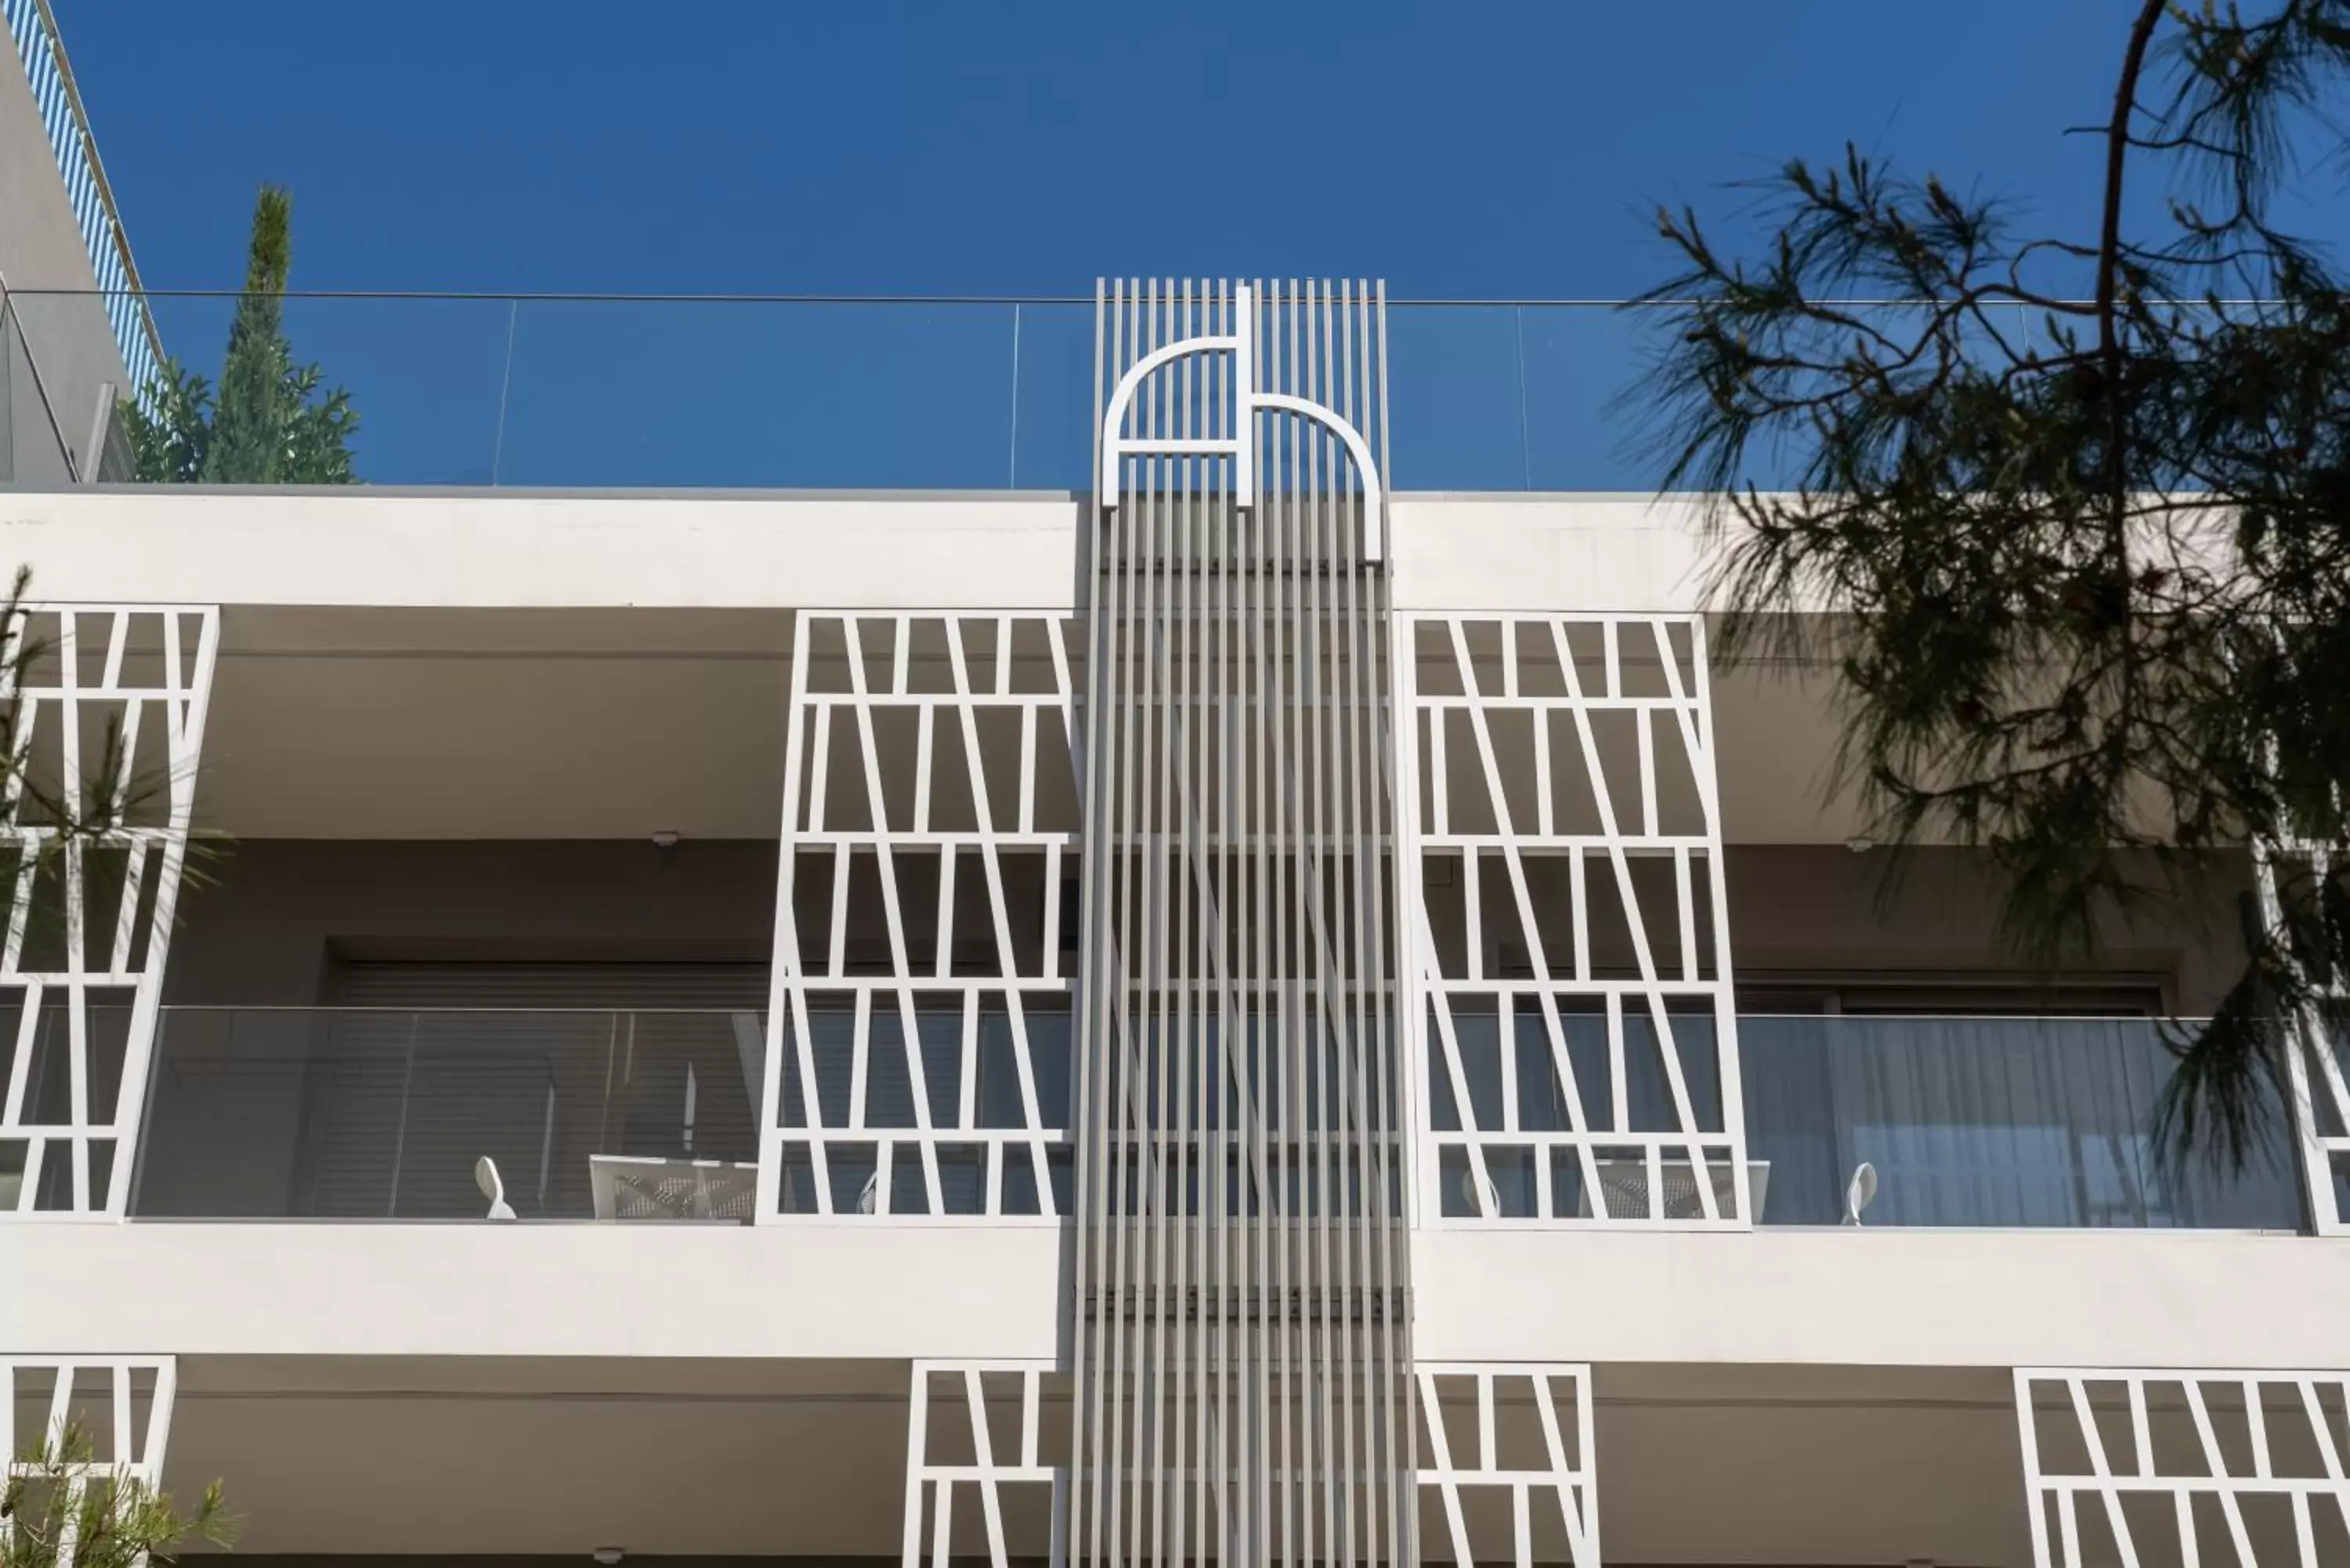 Property Building in Athens Hill Luxury Apartments